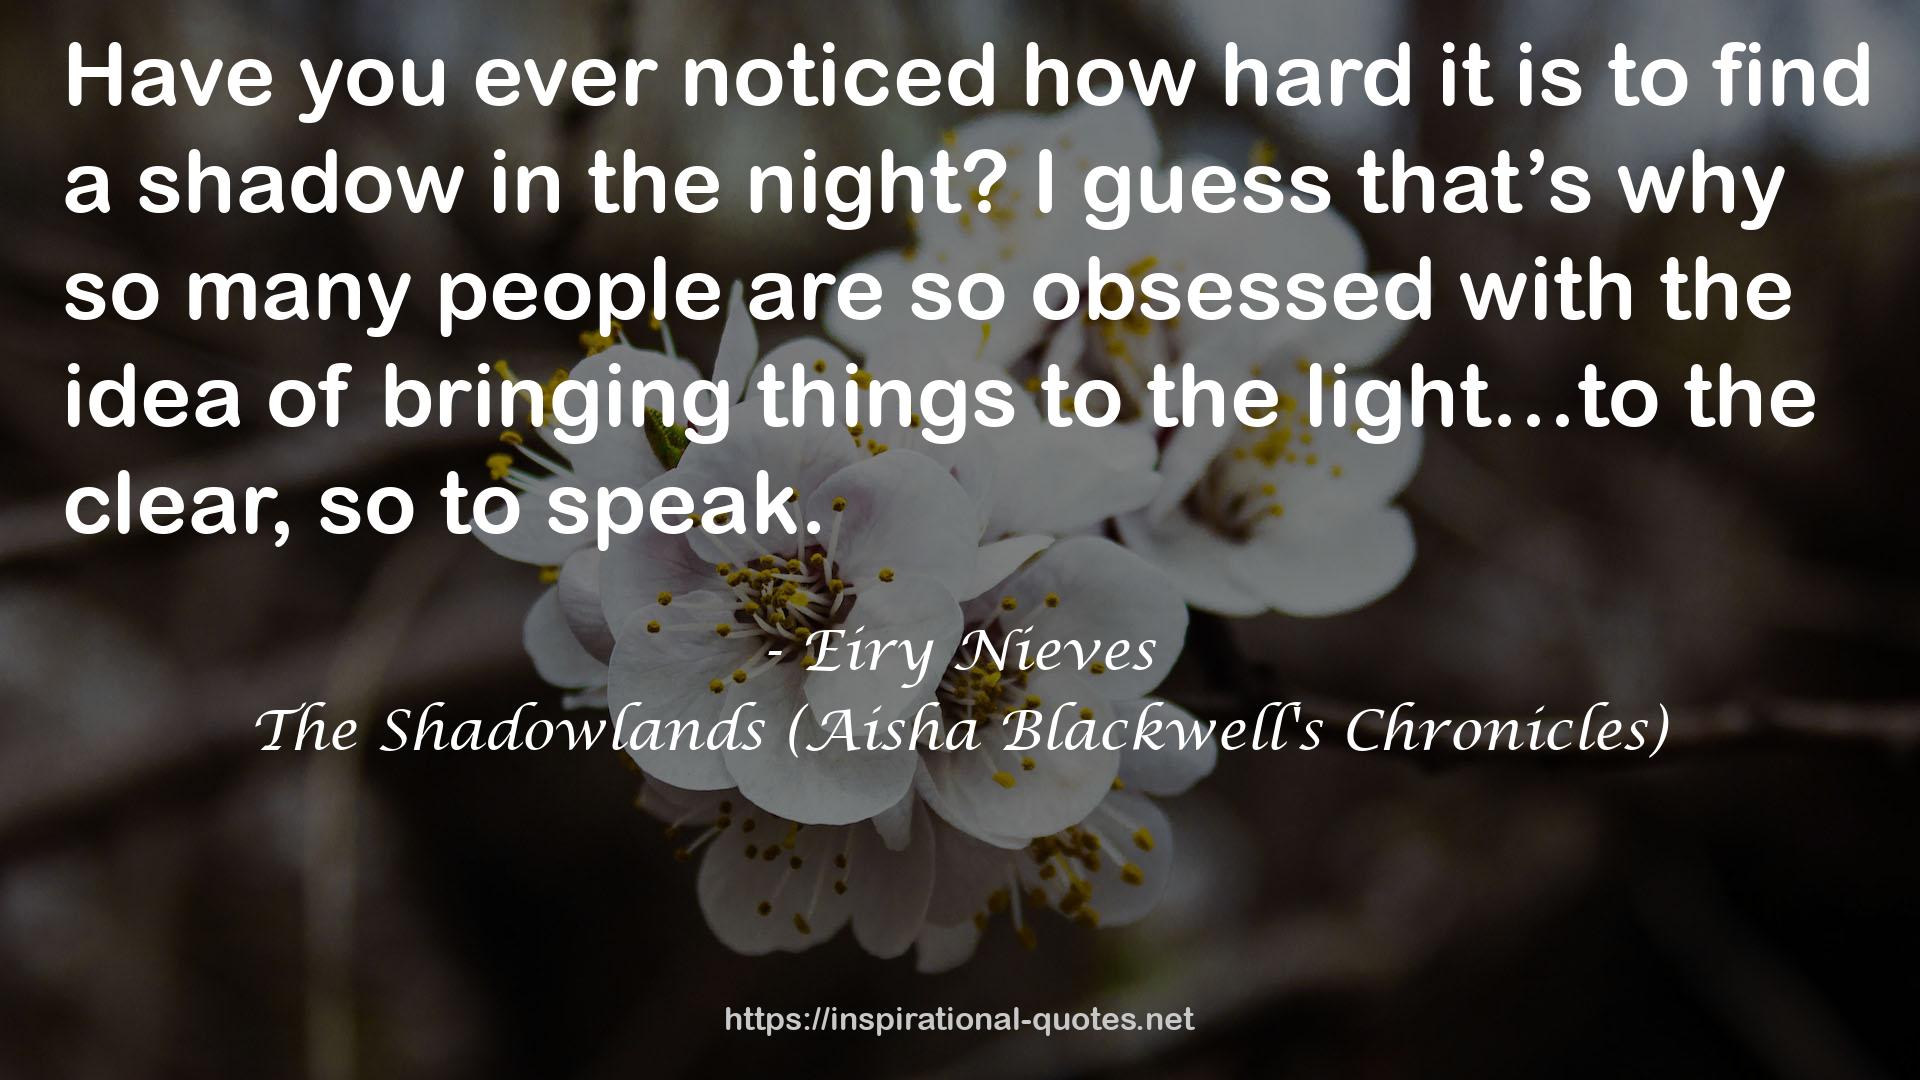 The Shadowlands (Aisha Blackwell's Chronicles) QUOTES